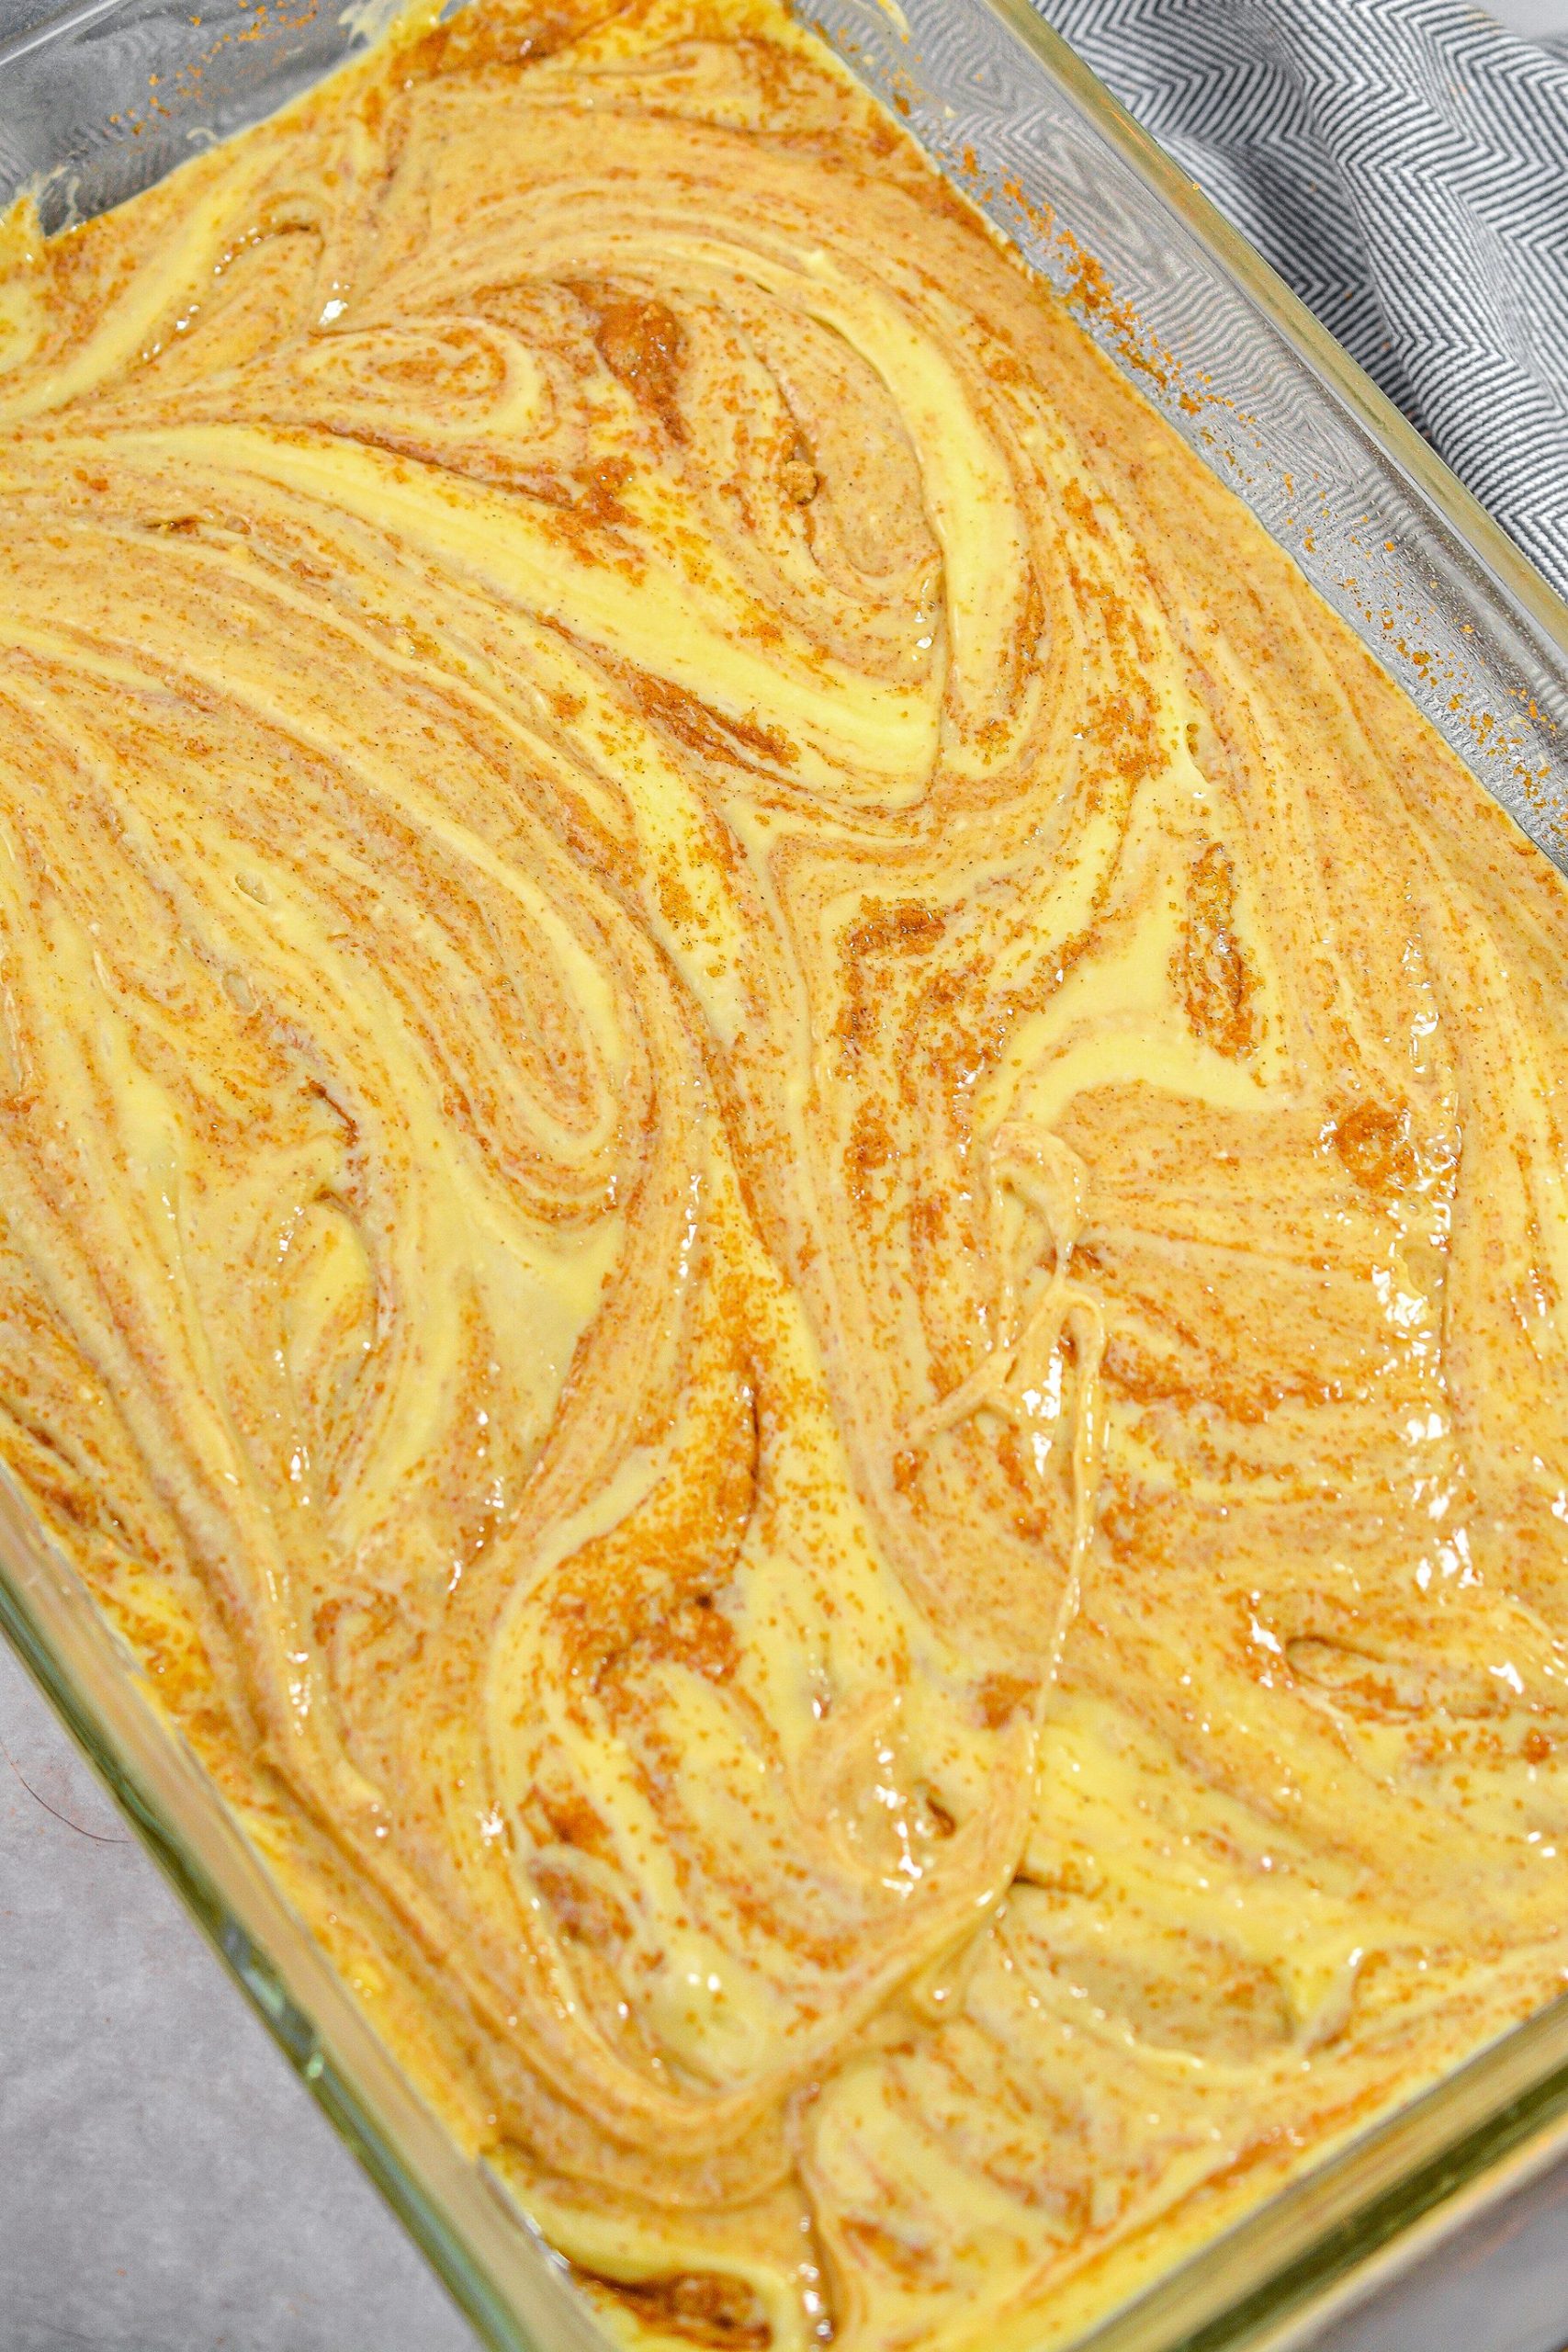 Pour the remaining cake batter into the casserole dish, and swirl to combine the mixture.